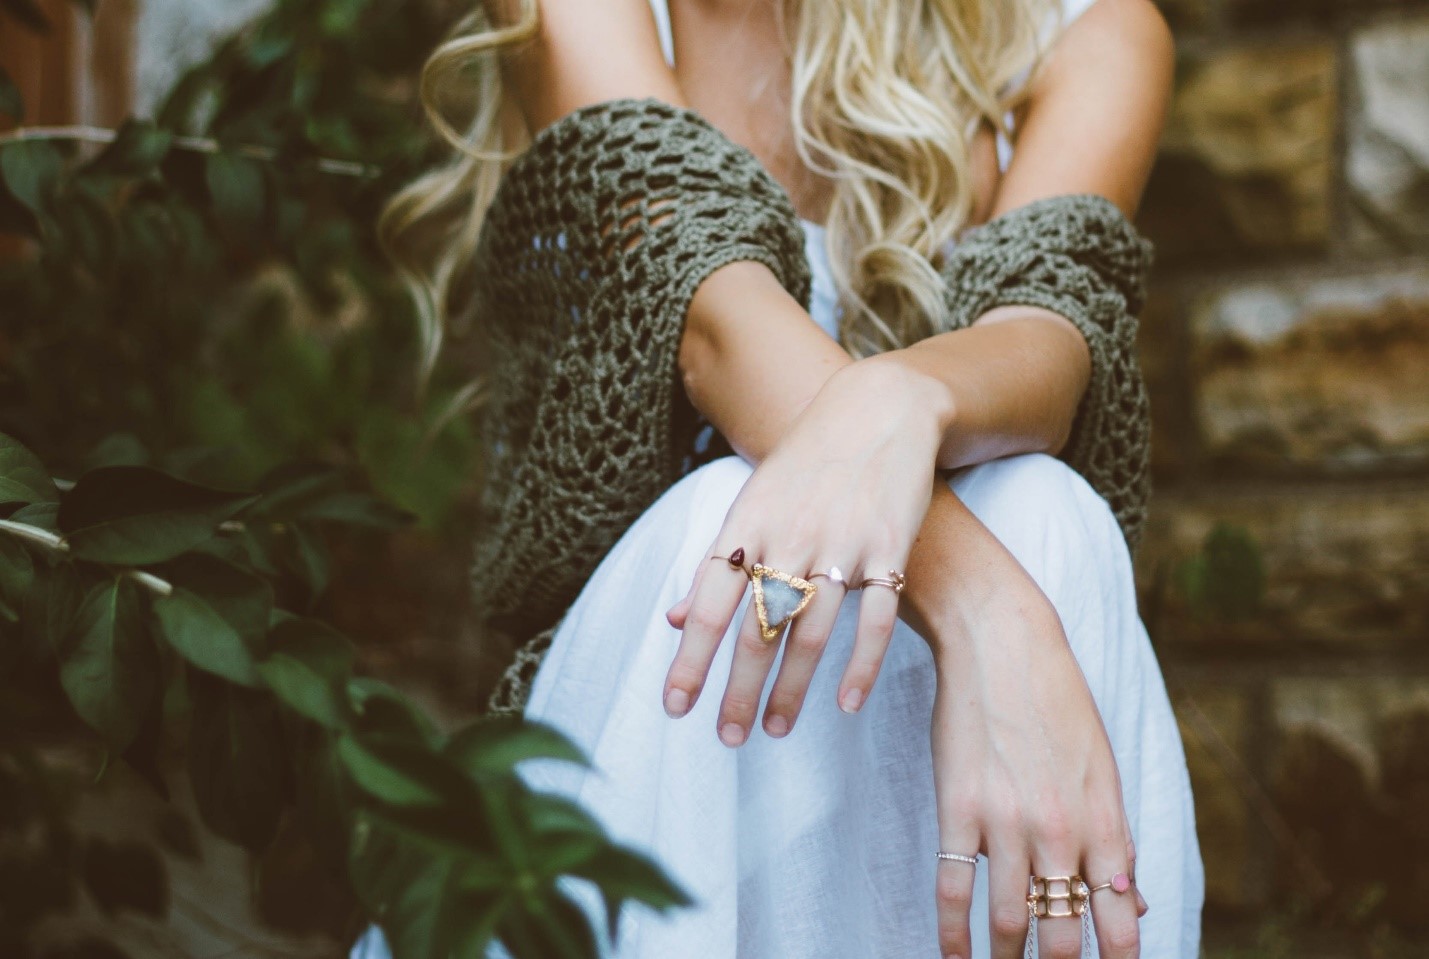 4 Jewelry Trends in 2020 You Won’t Want to Miss